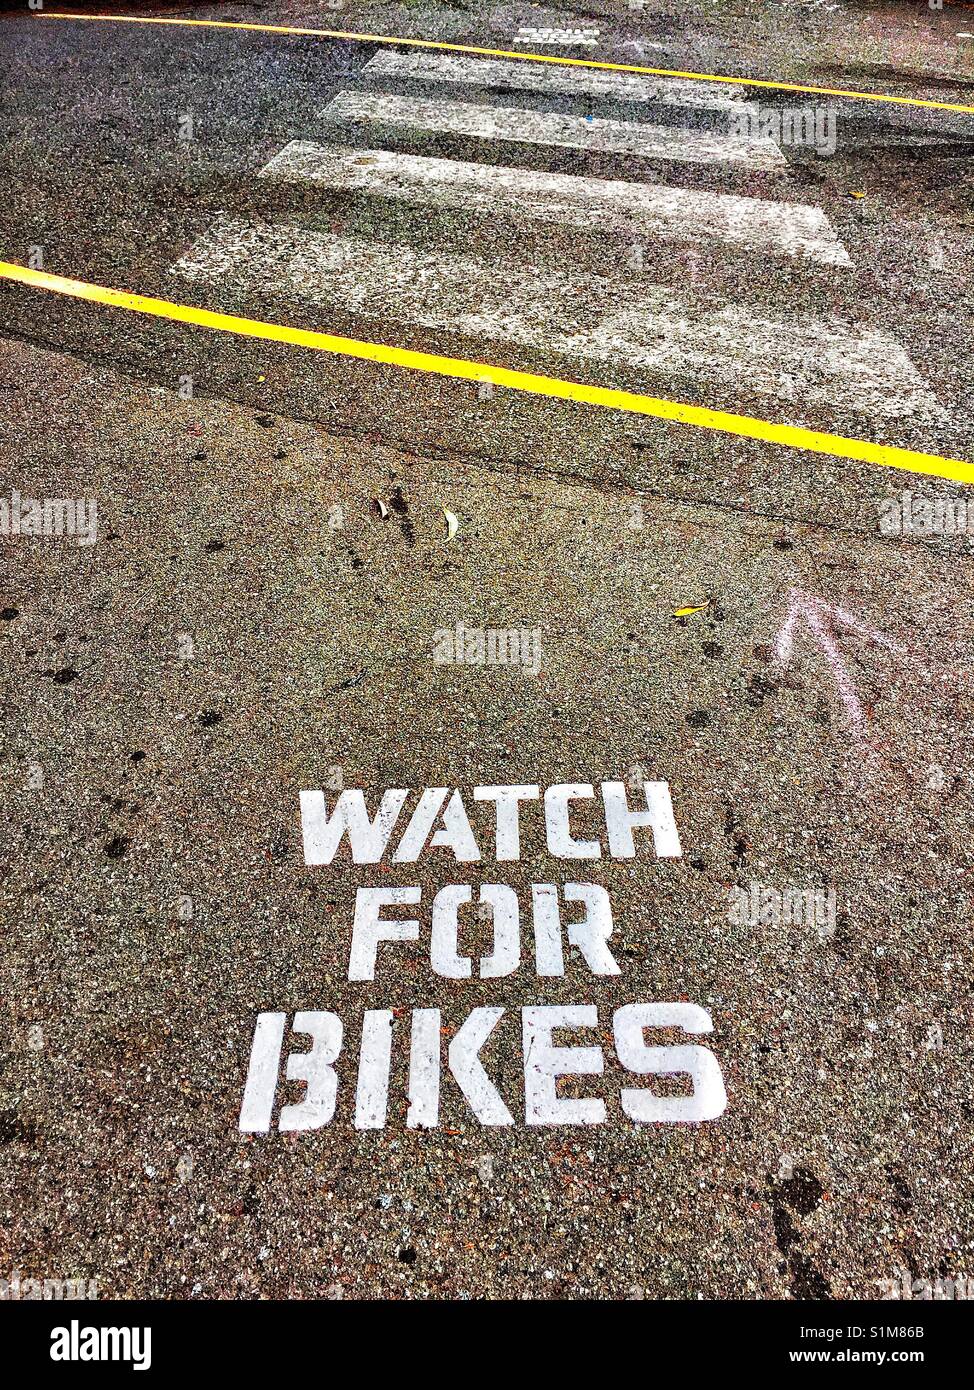 Safety notice warning pedestrians to 'watch for bikes' at crossing over bike path. Stock Photo